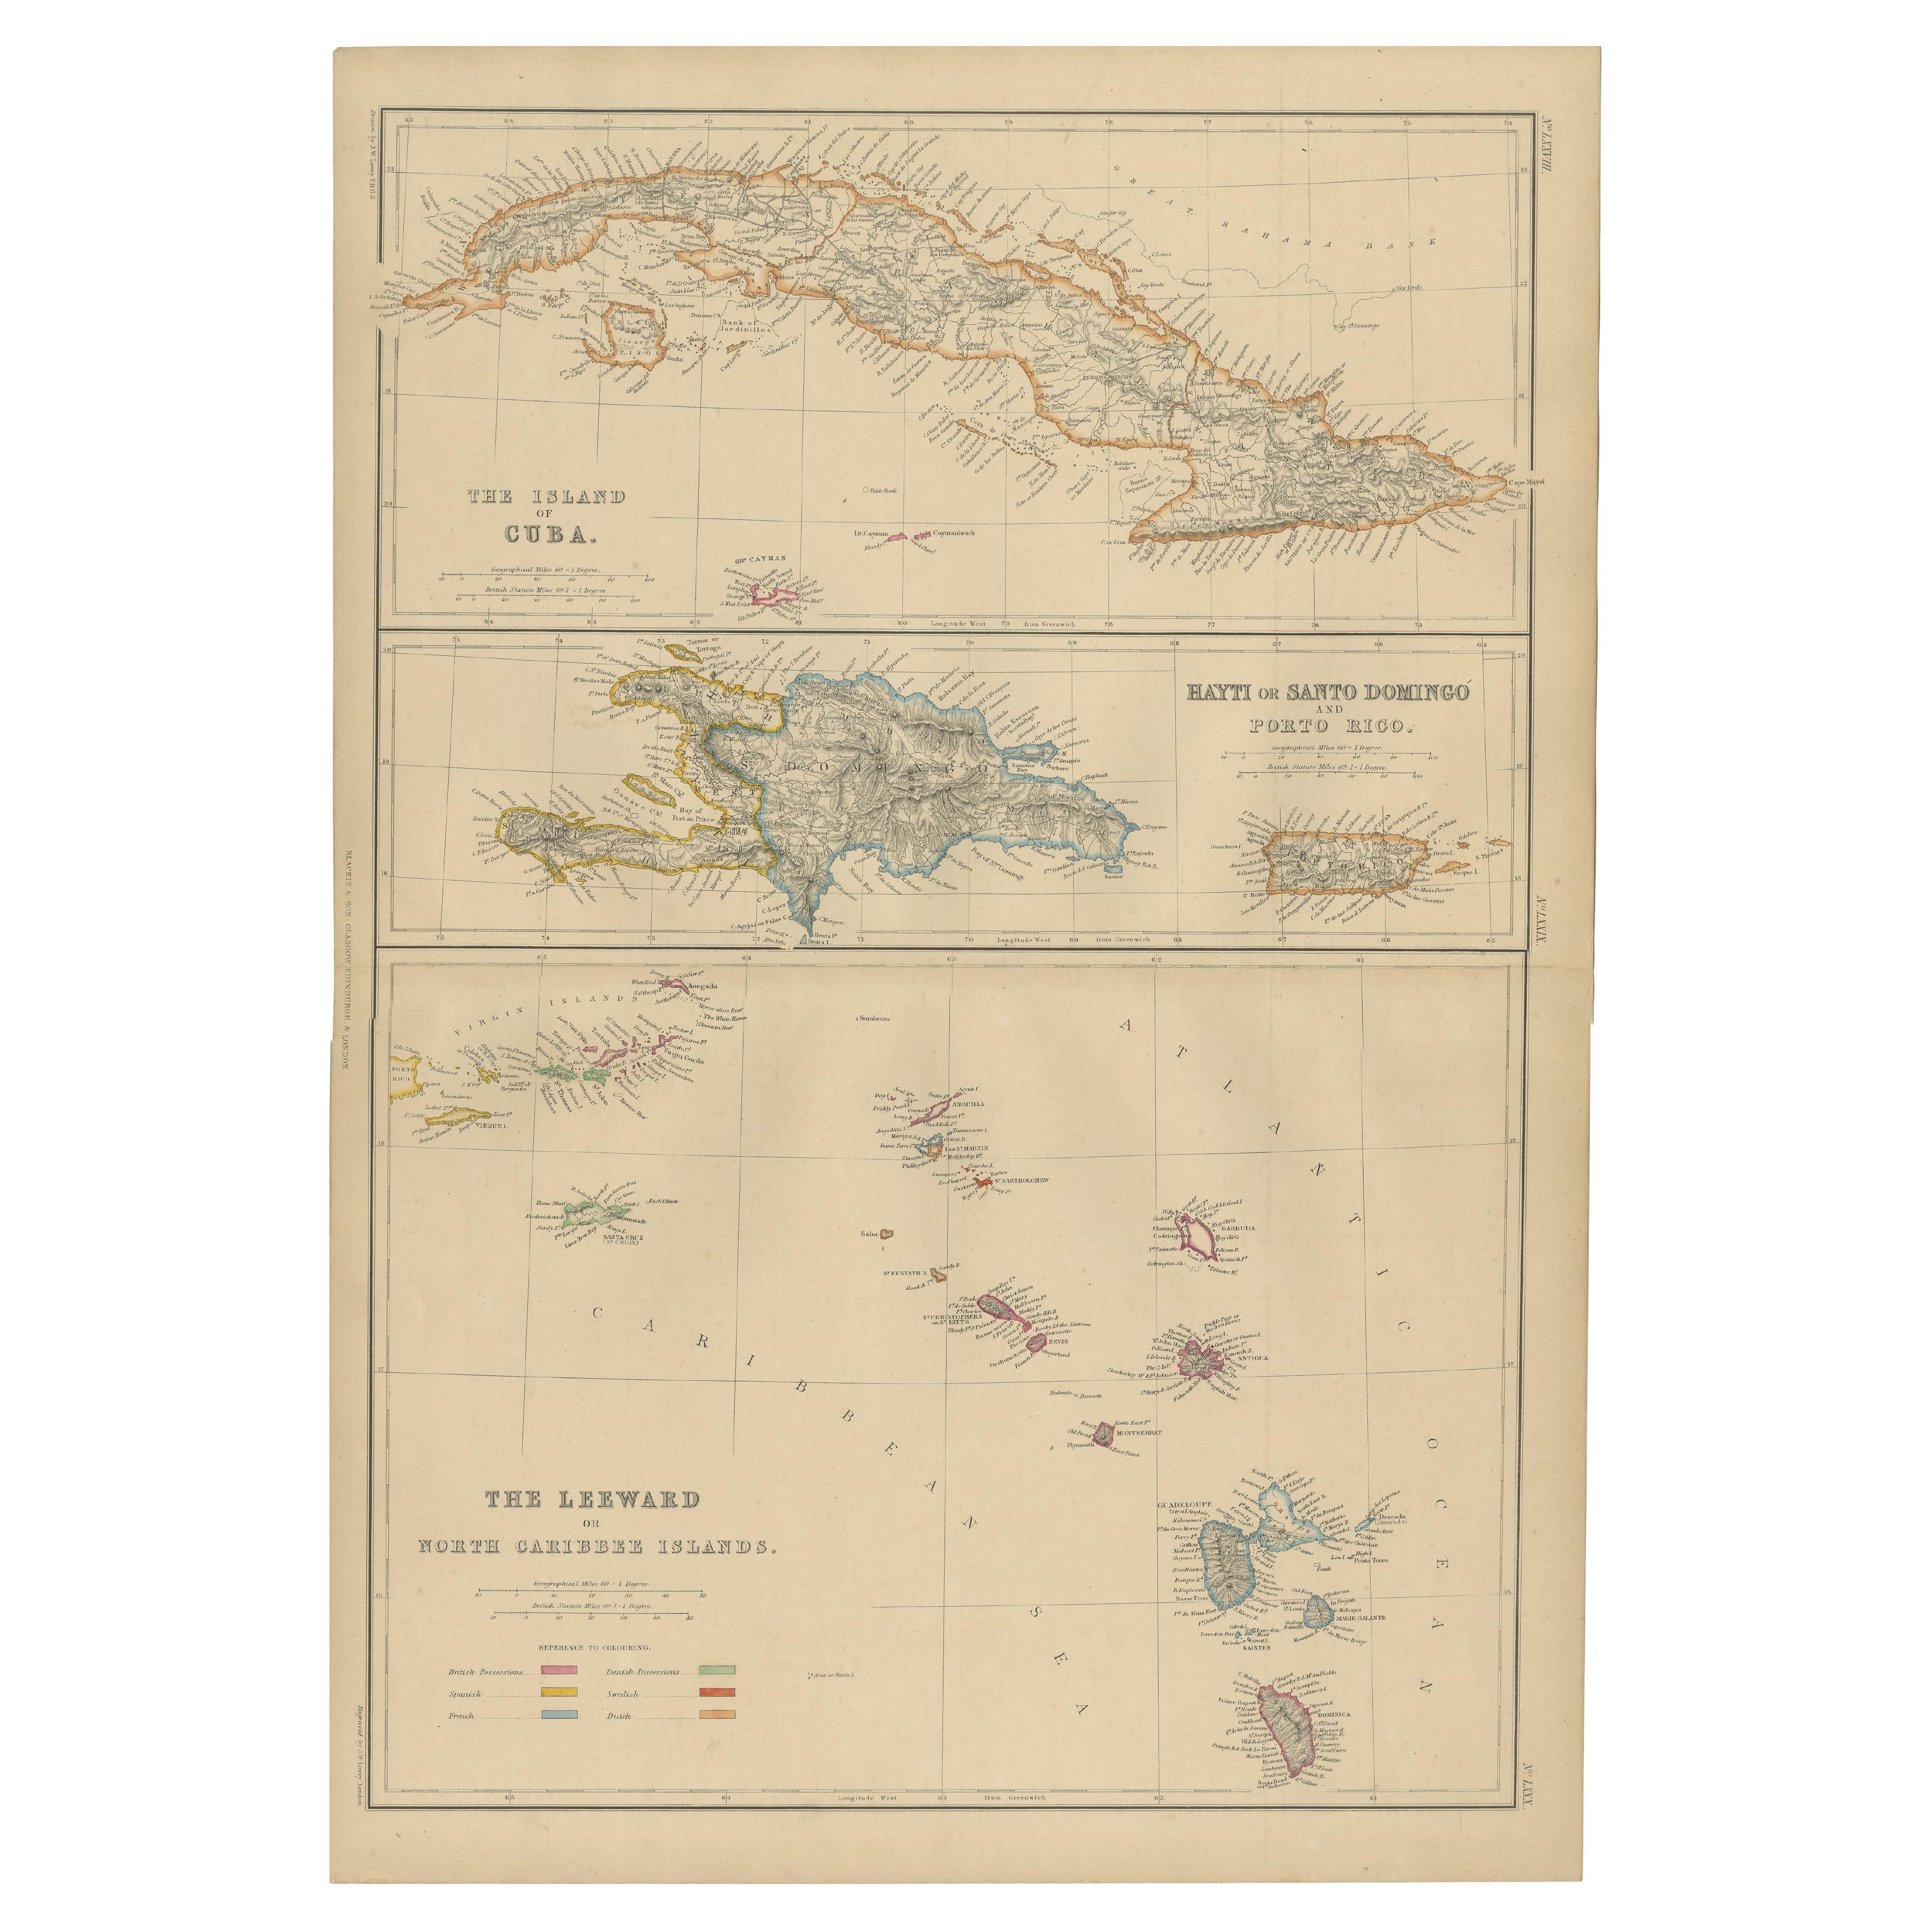 Antique Map of Cuba, Haiti and Porto Rico by W. G. Blackie, 1859